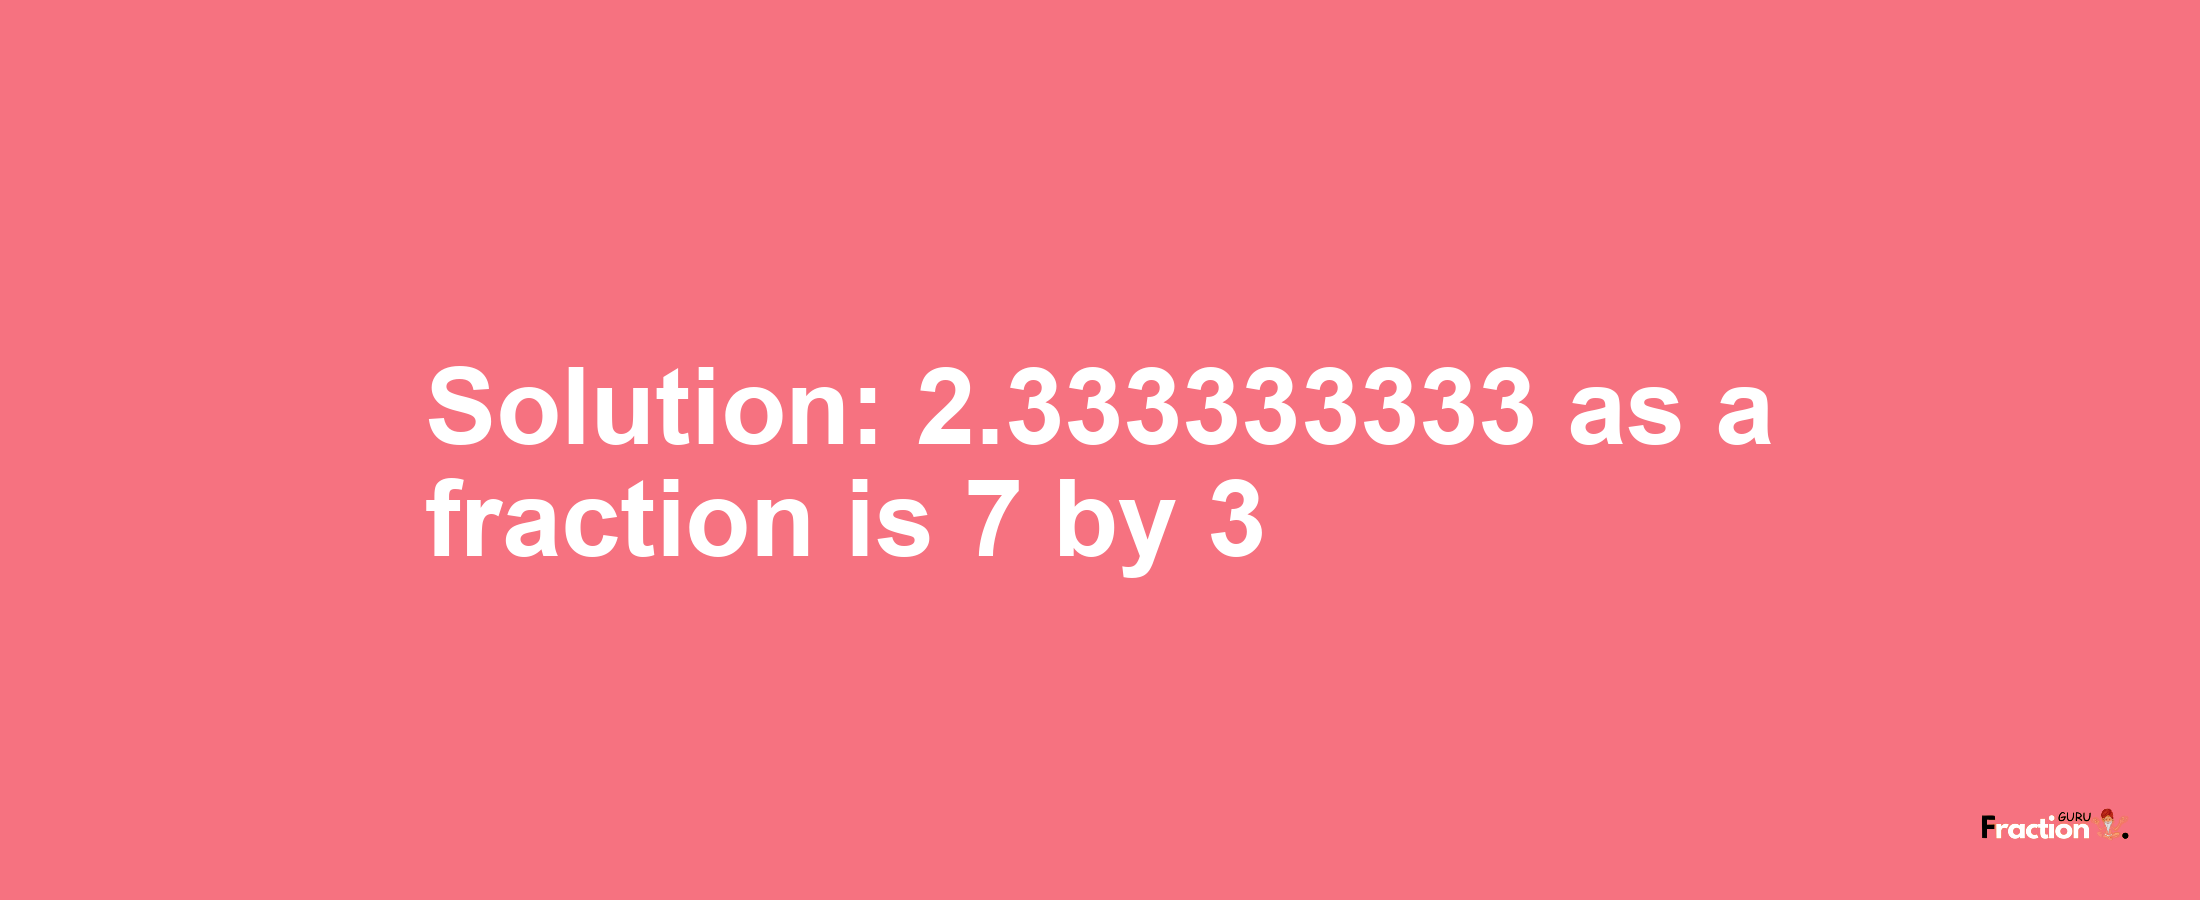 Solution:2.333333333 as a fraction is 7/3